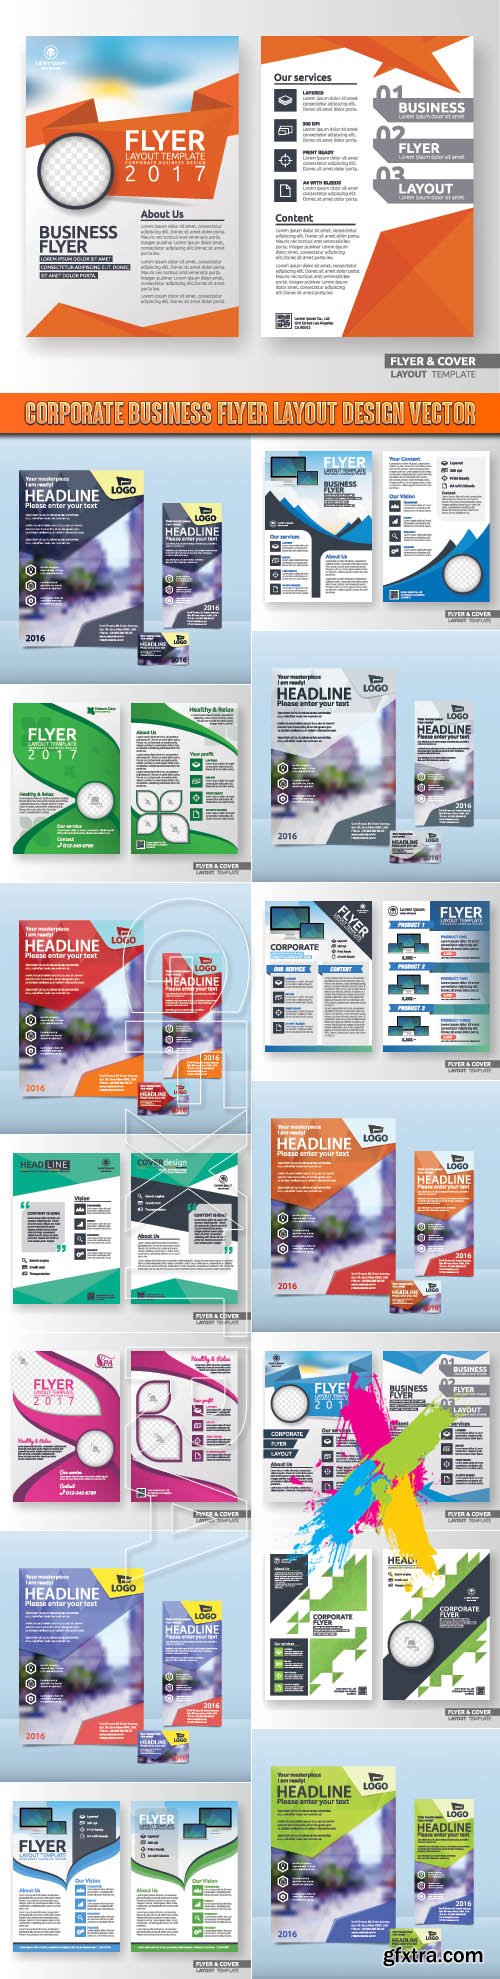 Corporate business flyer layout design vector